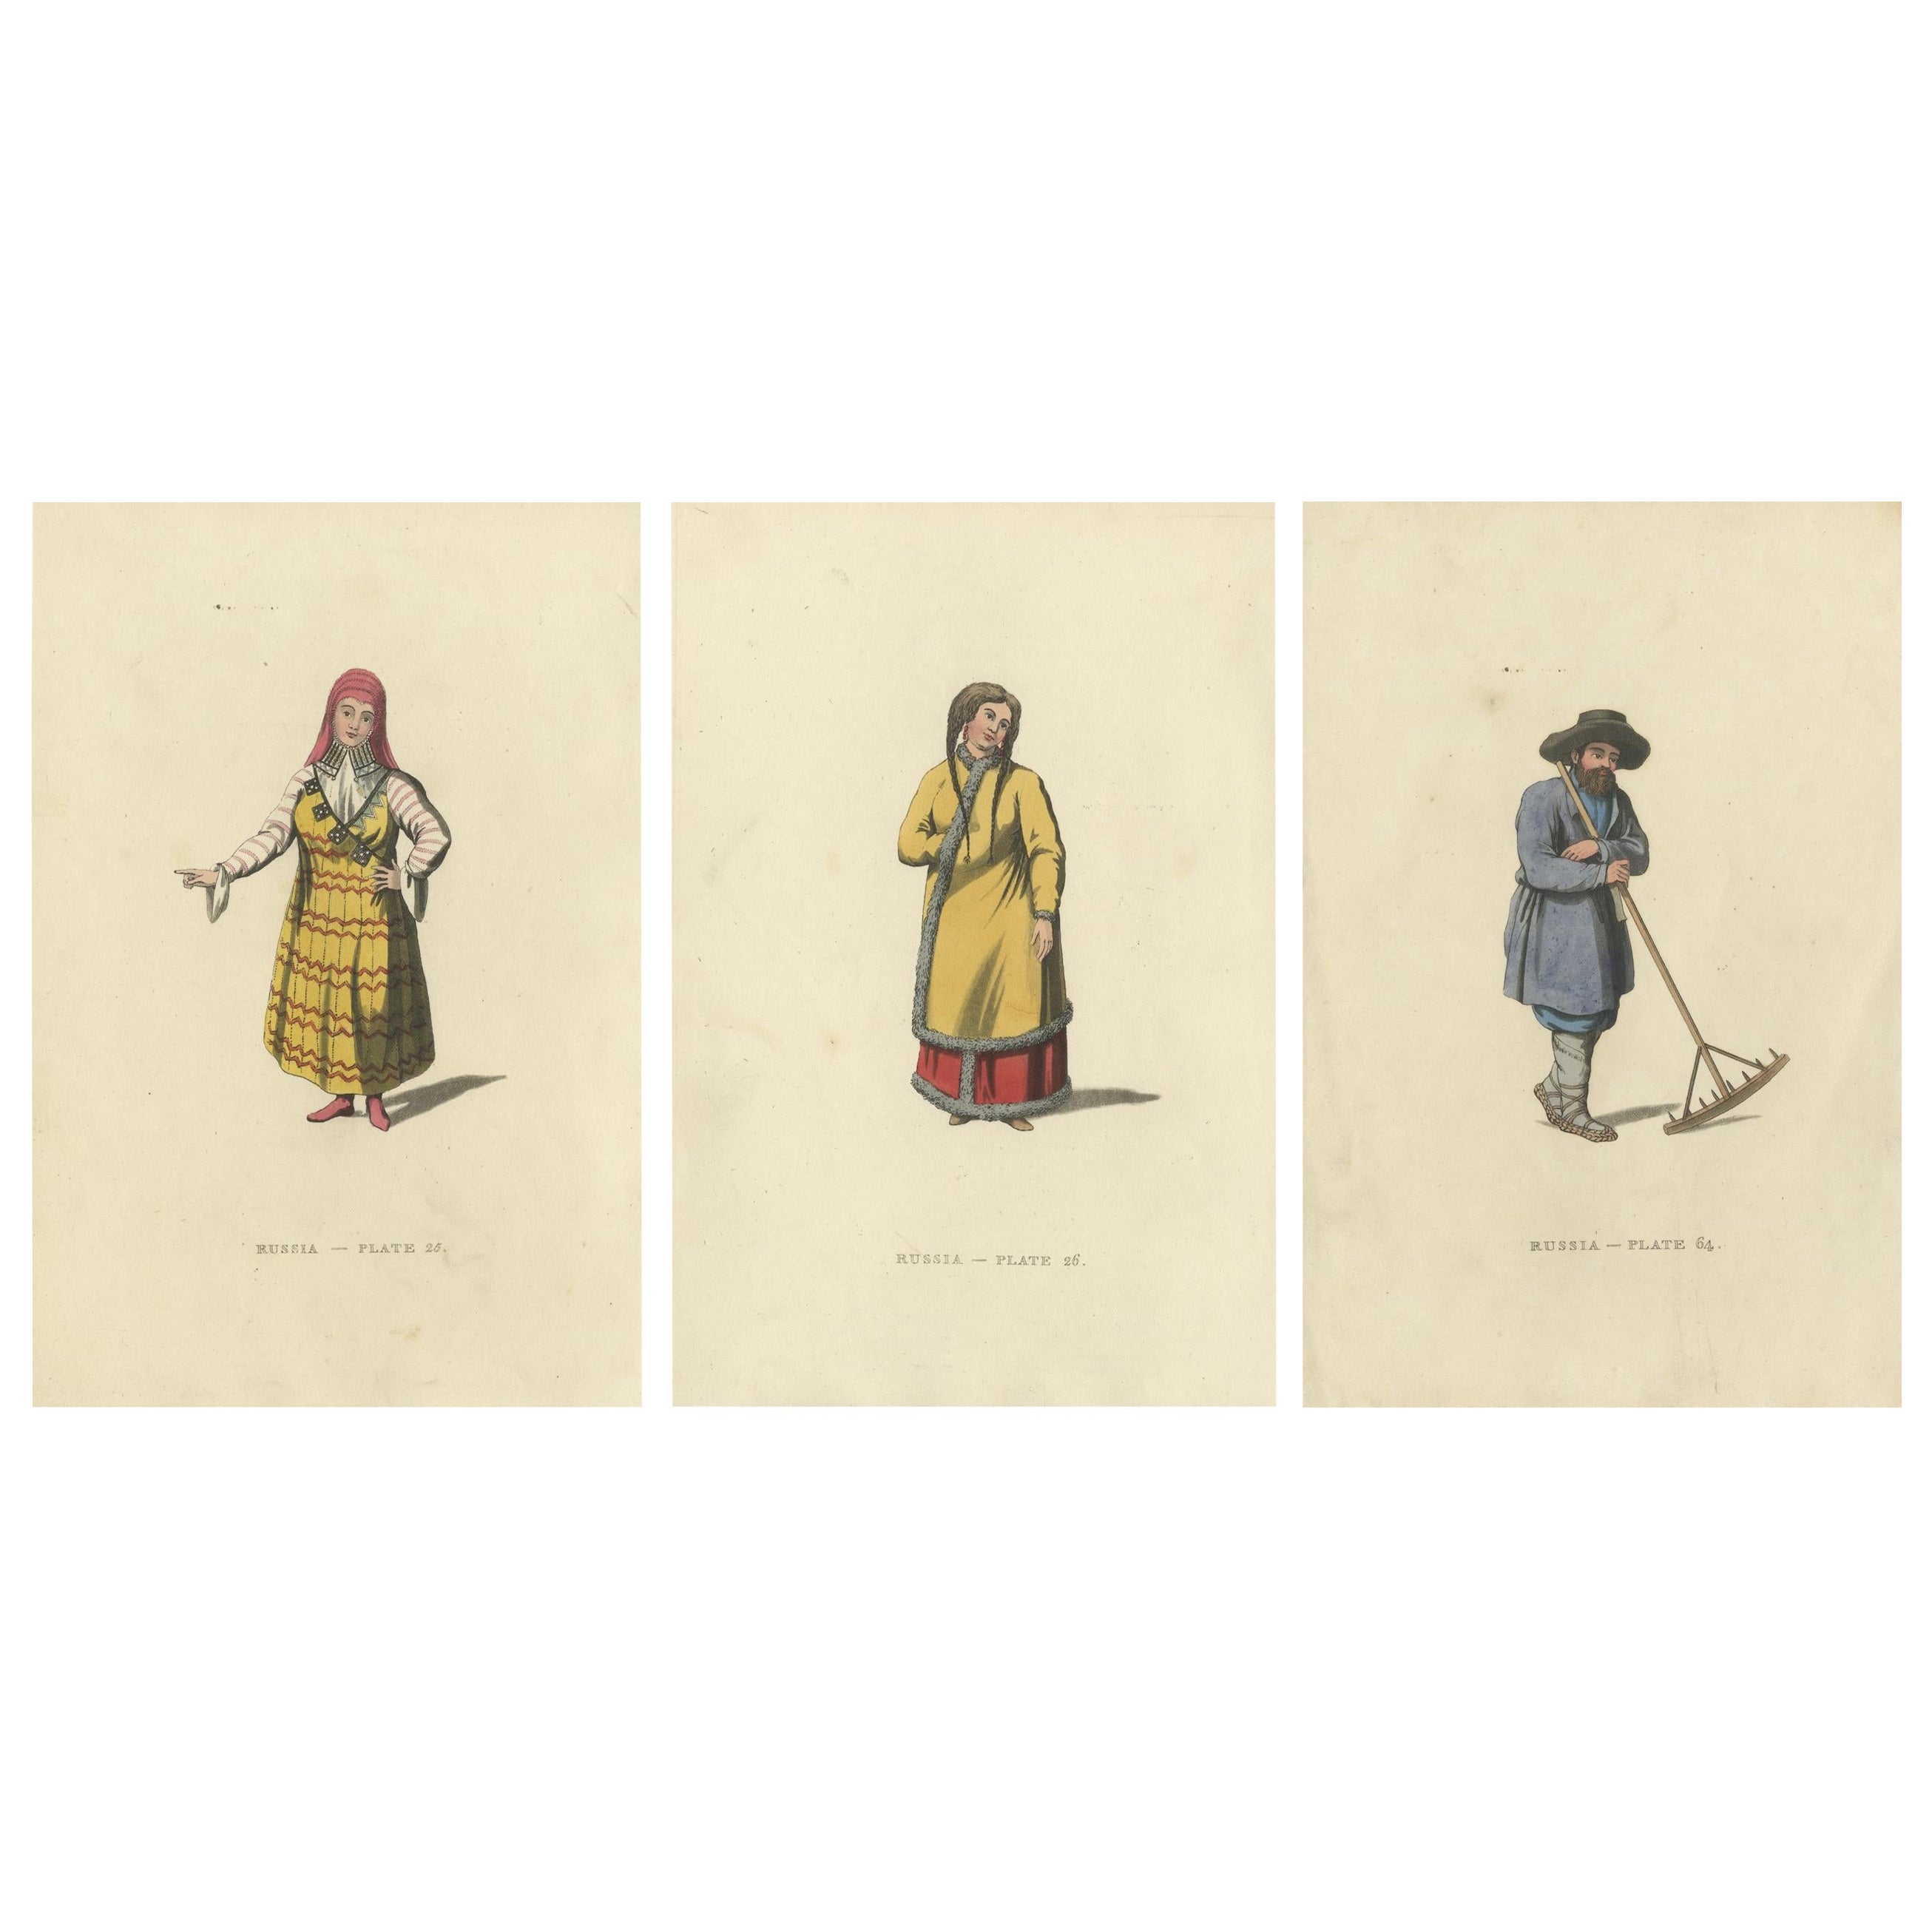 Traditional Attires of Early 19th Century Russia: A Visual Record in Engravings For Sale